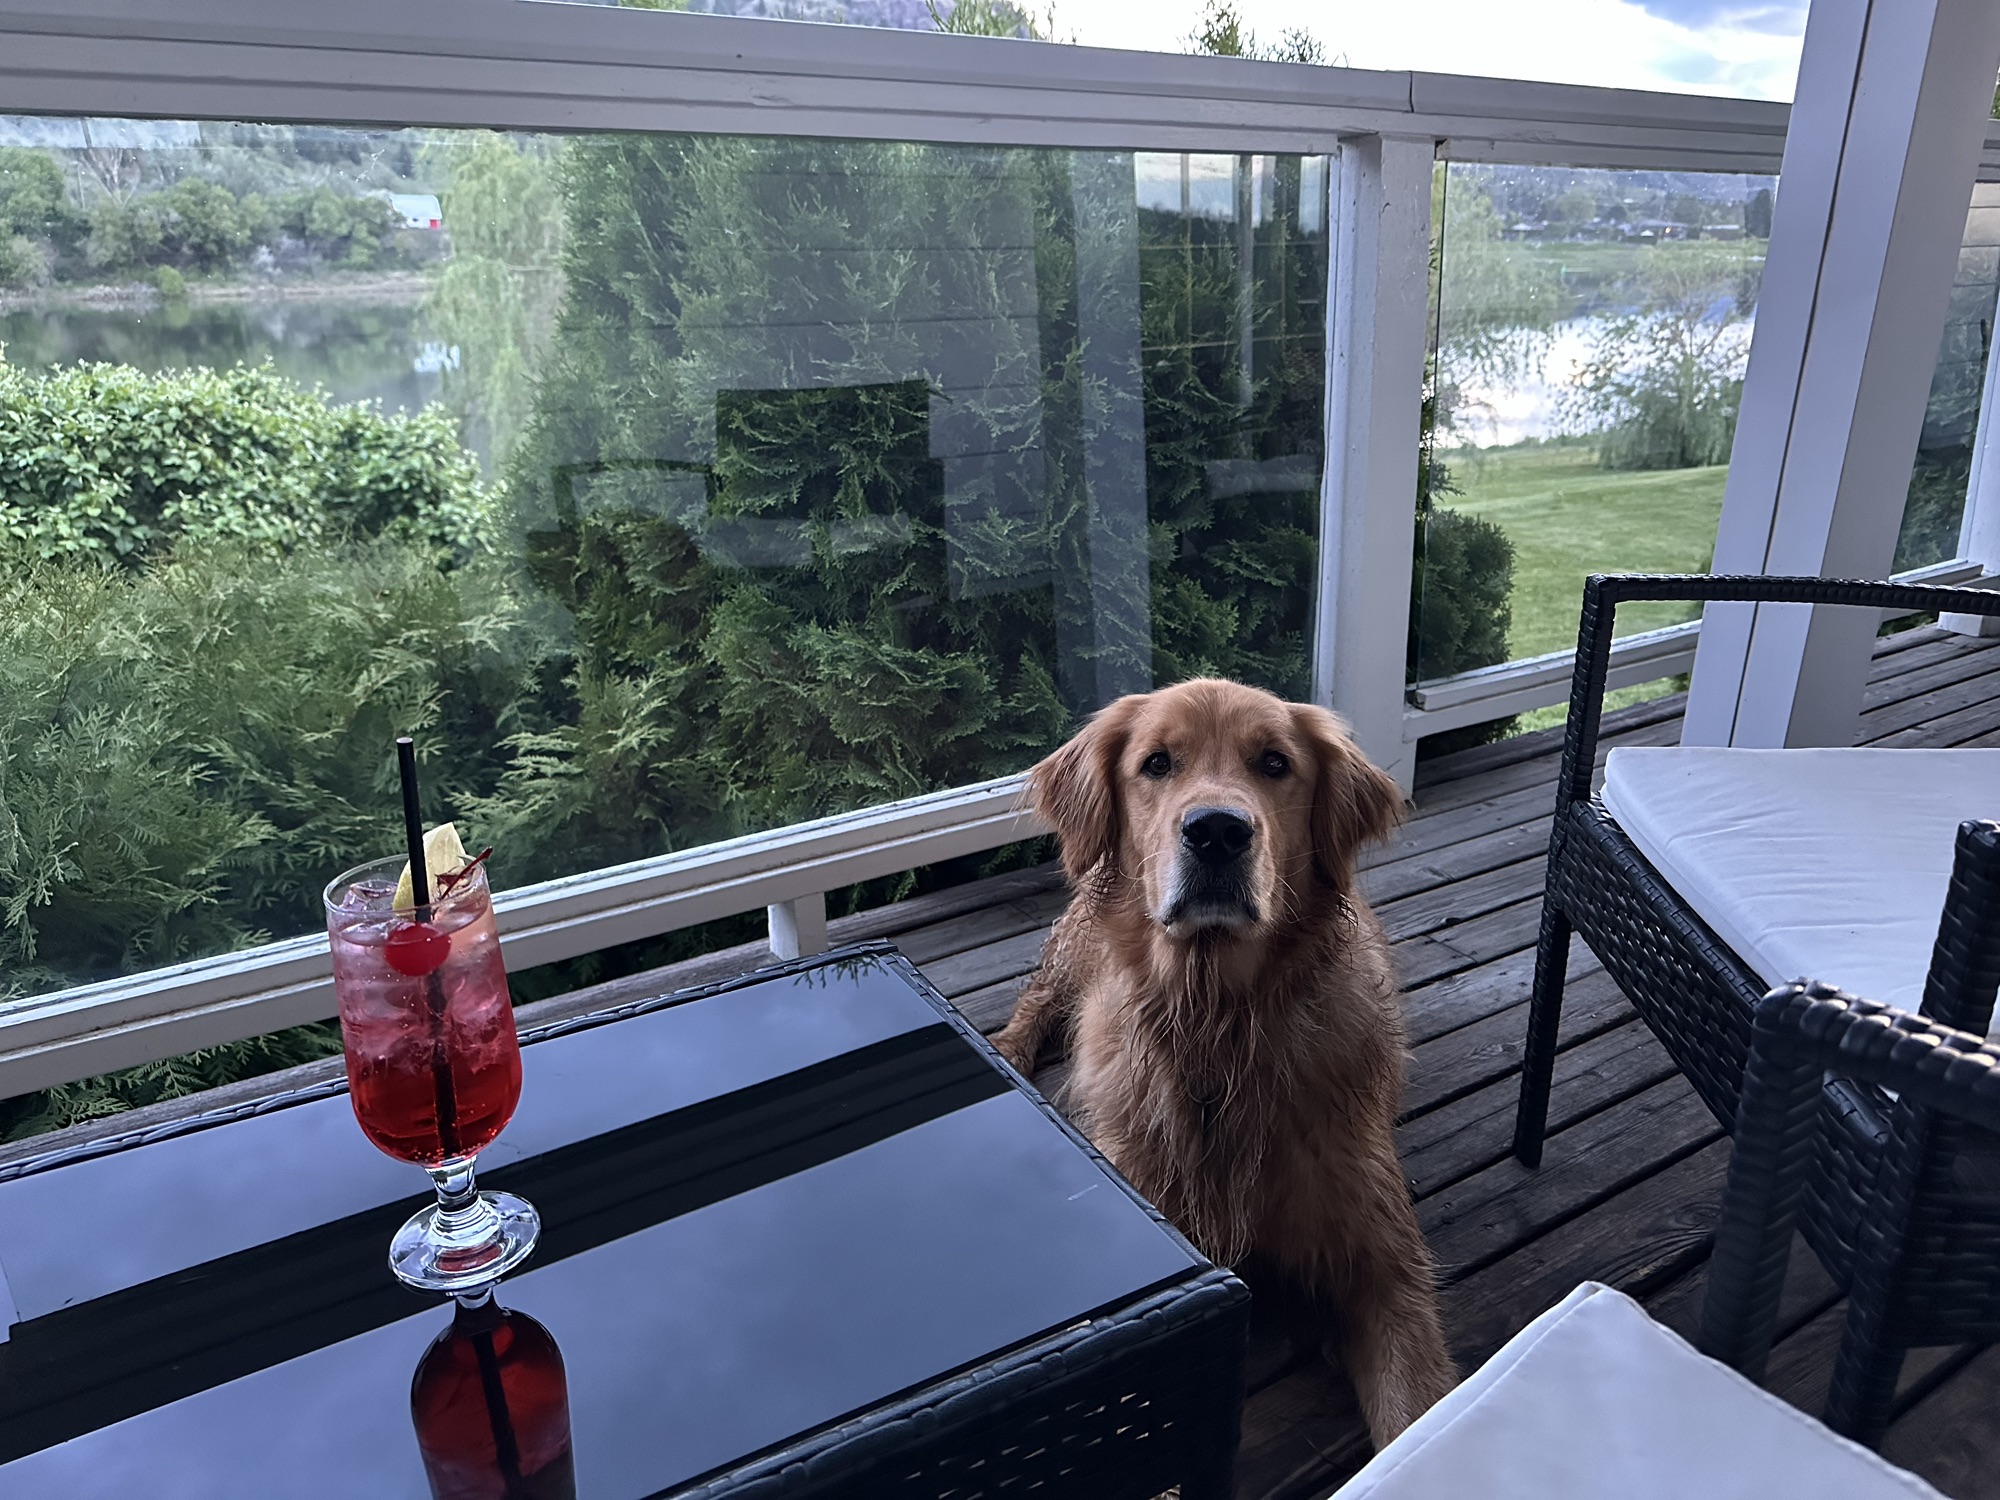 A good boy golden retriever sits next to a glass of Shirley Temple on the balcony of an inn overlooking the South Thompson River